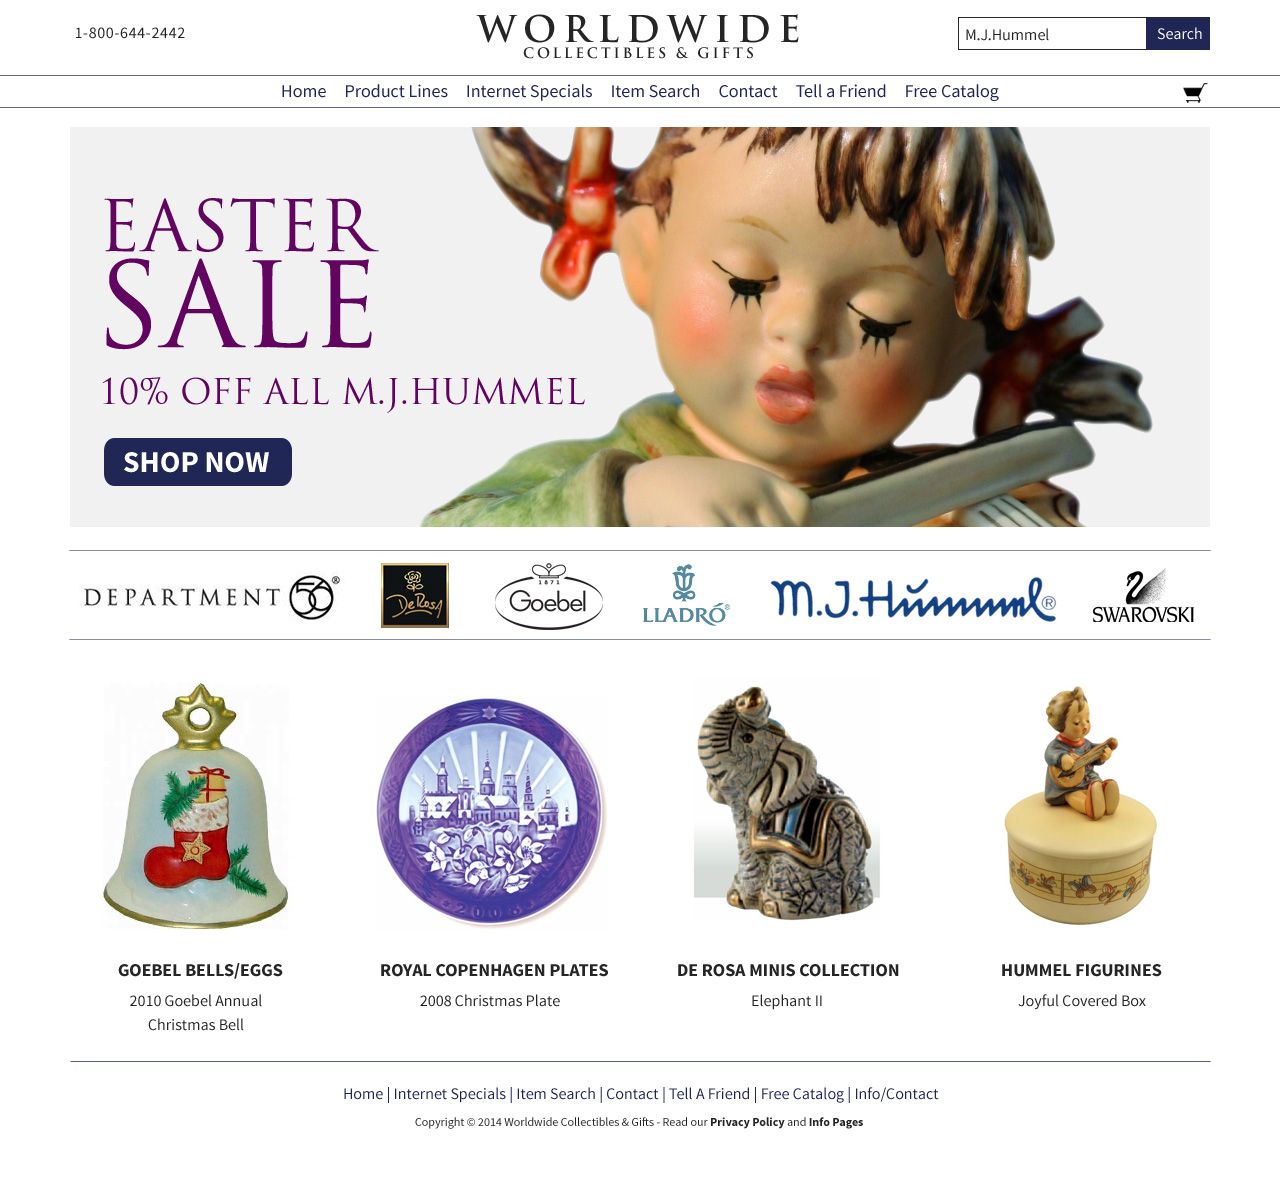 Worldwide Collectibles Home Page